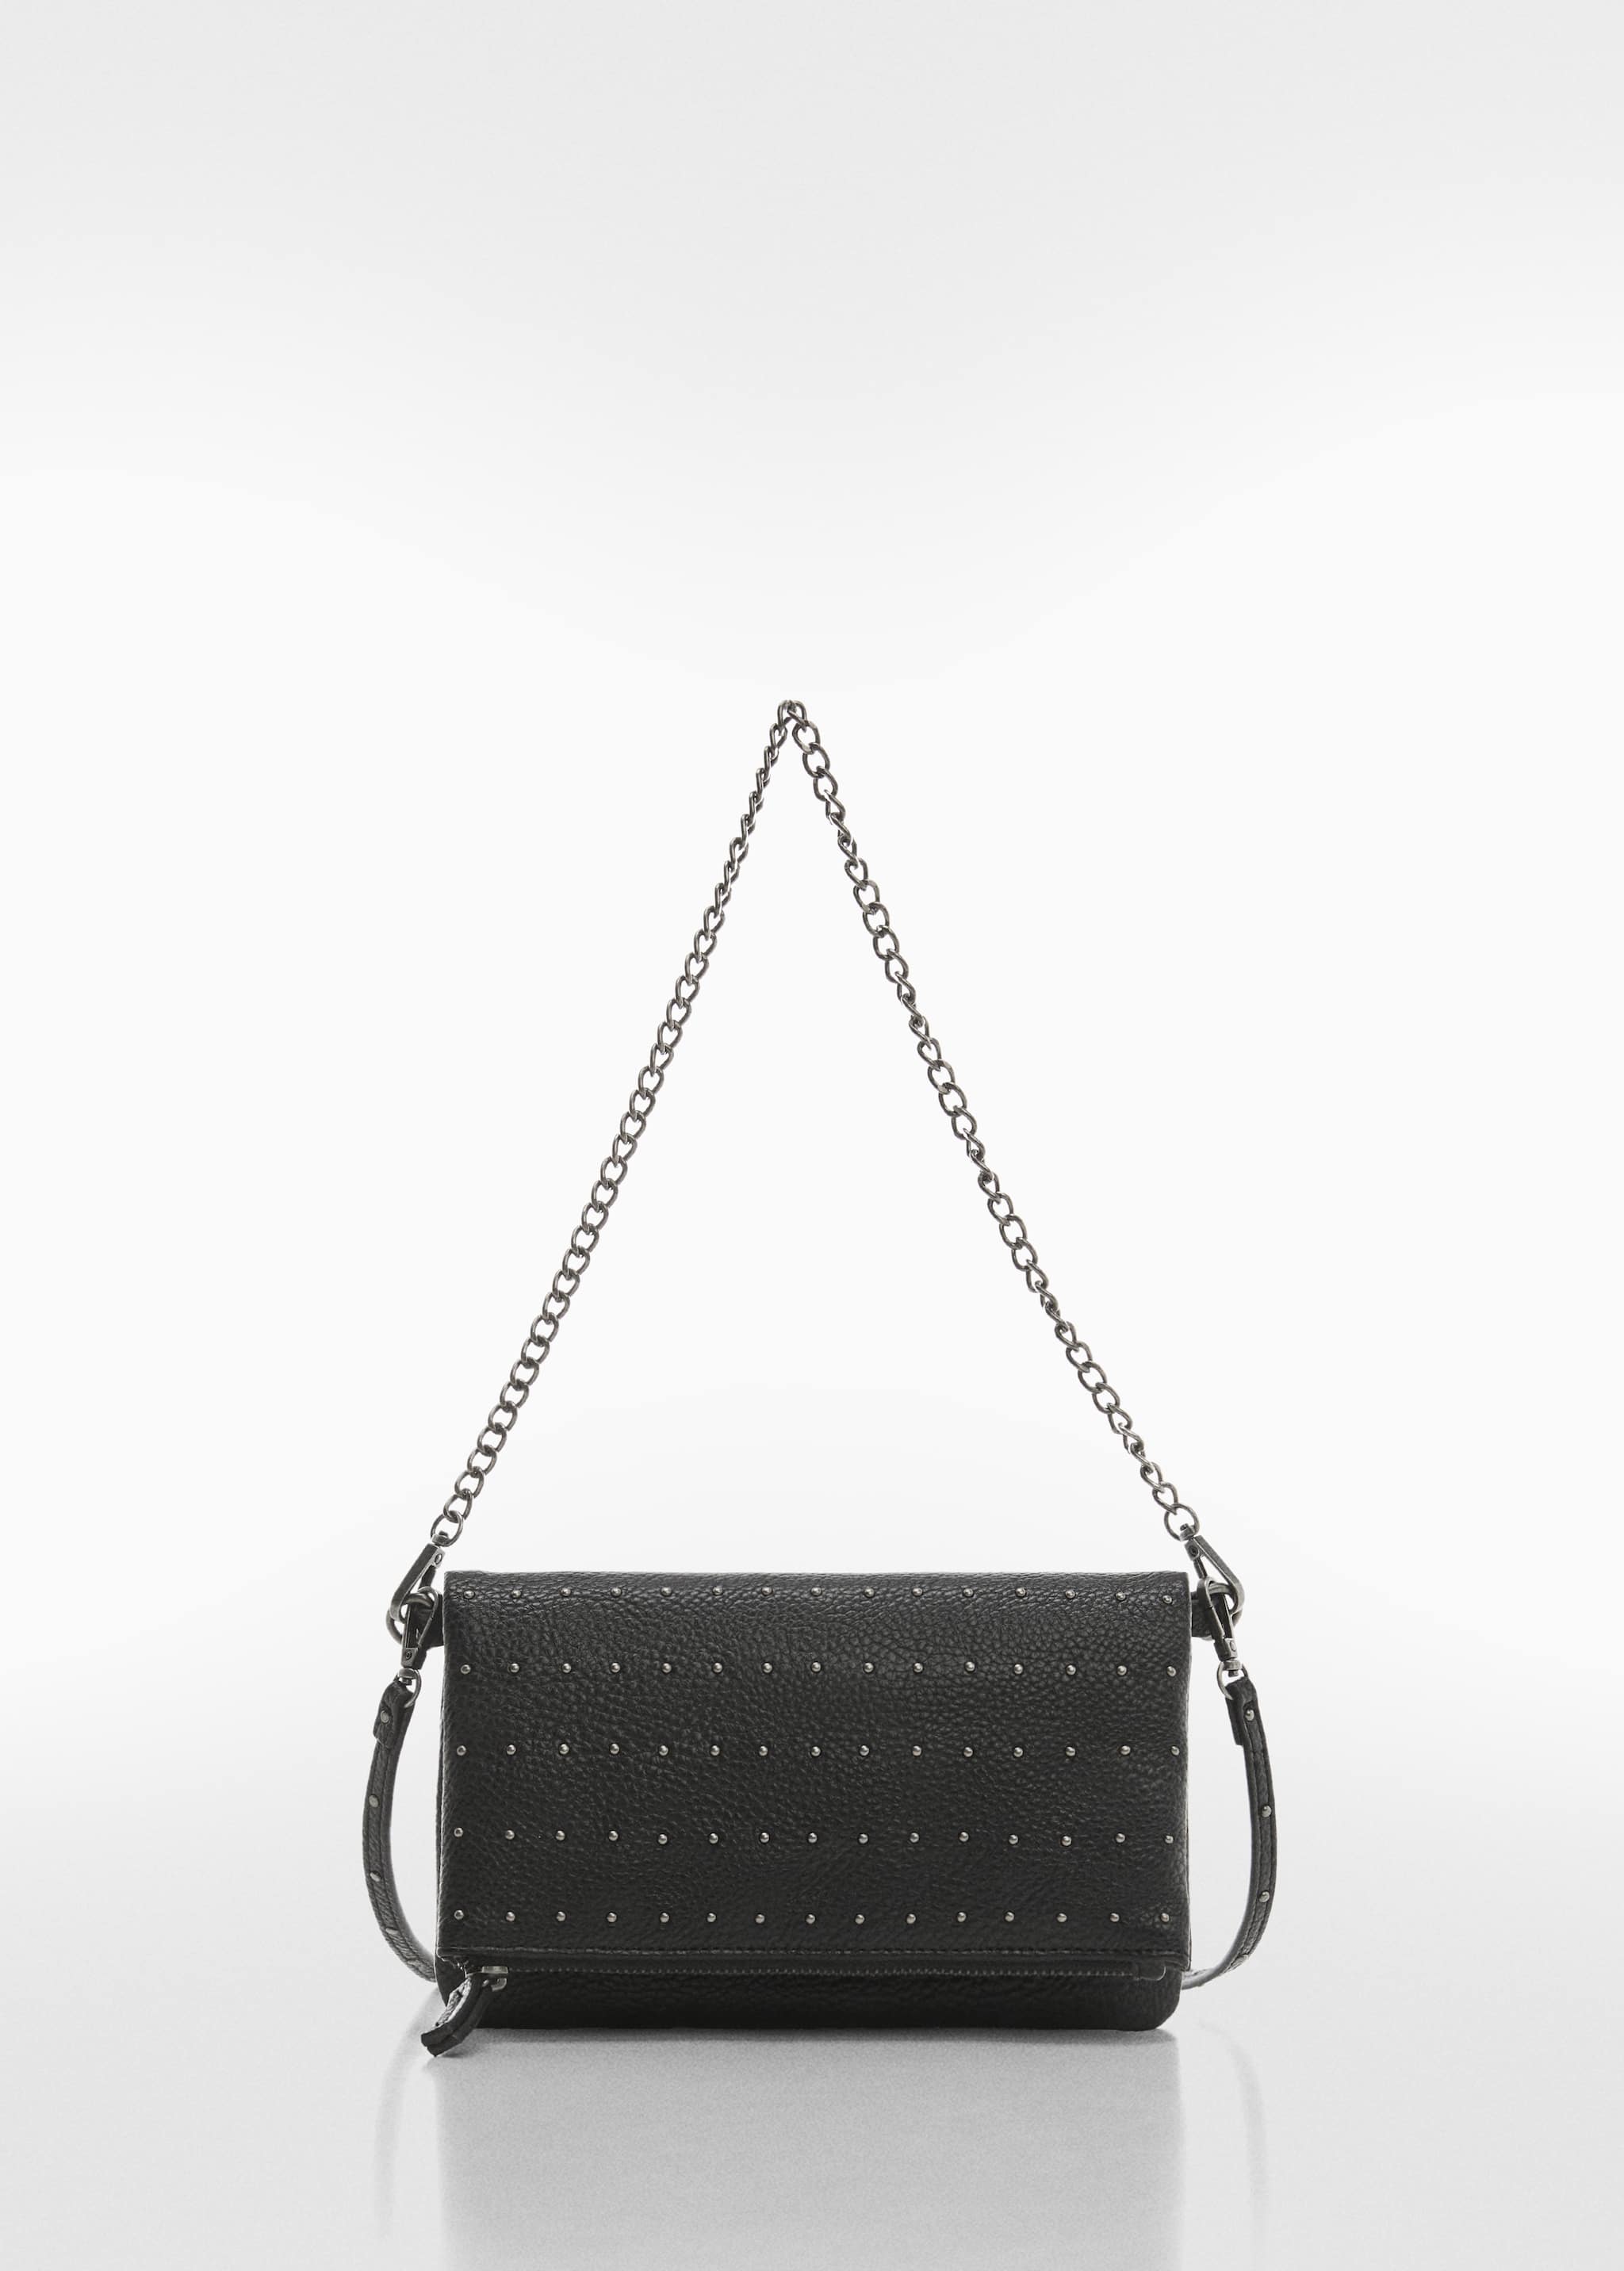 Studded chain bag - Article without model